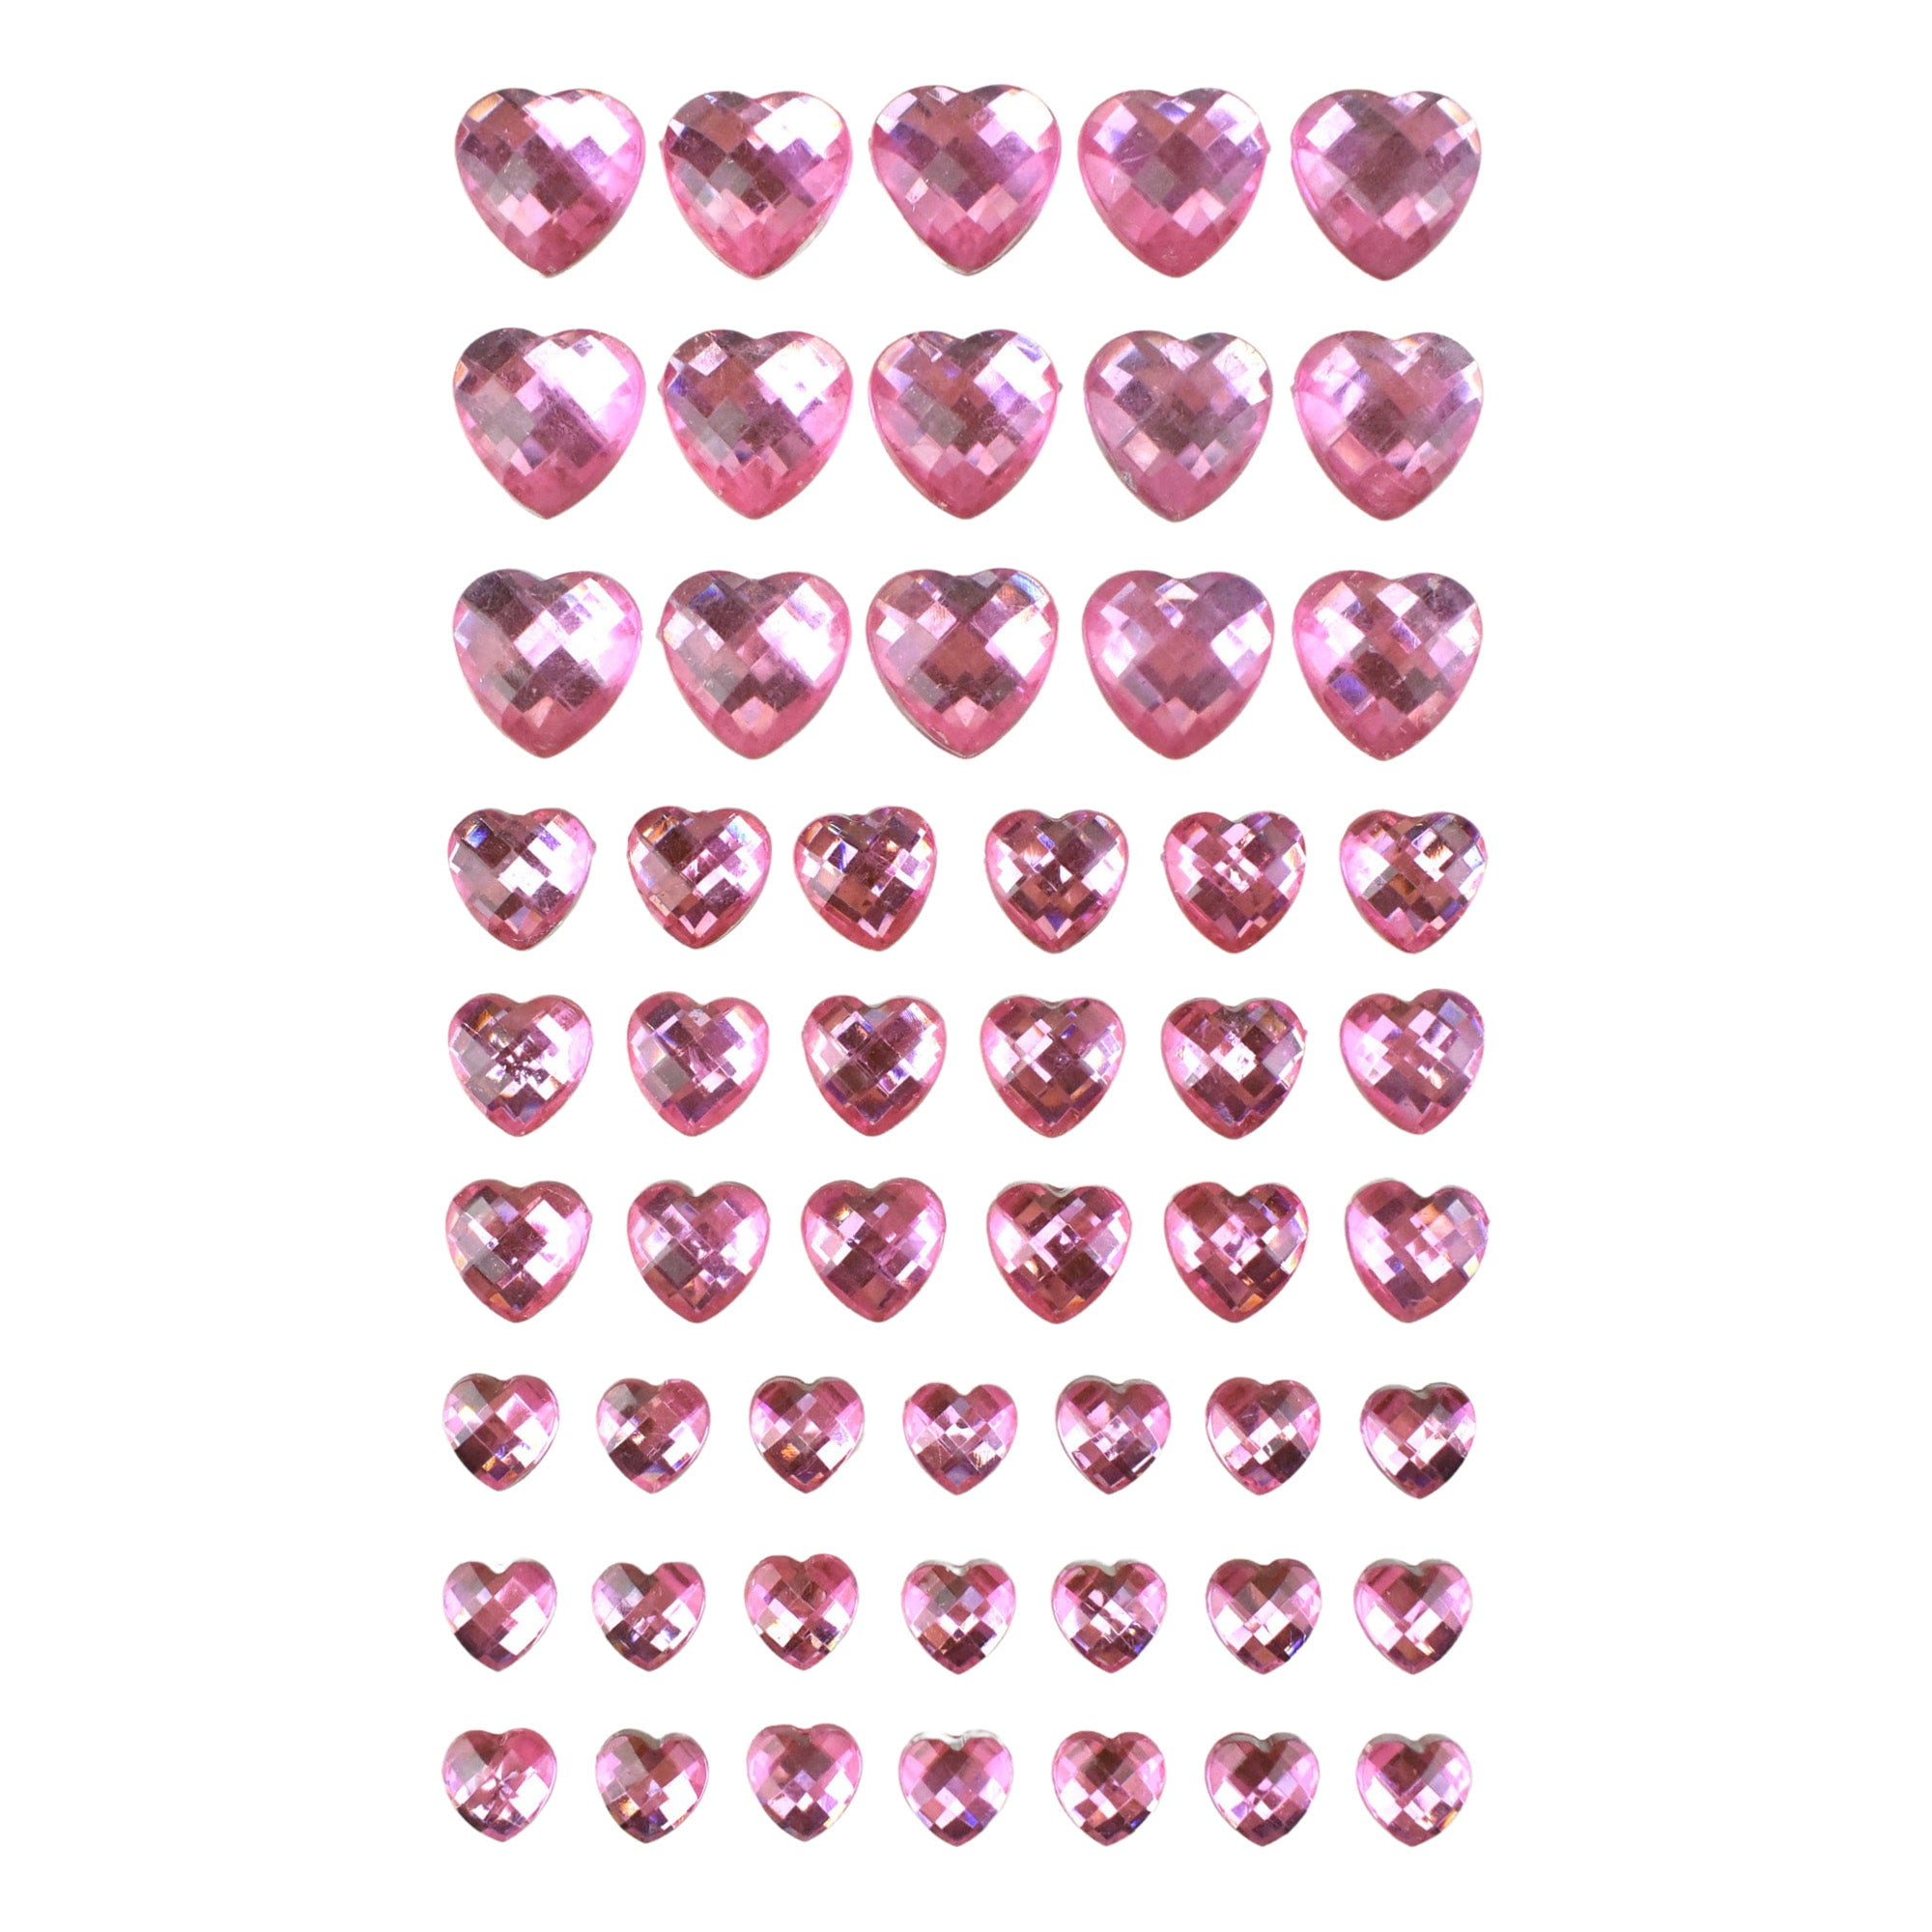 250-Pack Heart Stickers for Greeting Cards, Envelope Stickers for Wedding  Invites, Thank You Cards, Letters, Clear Vinyl Save the Date Labels (1.25  in) 